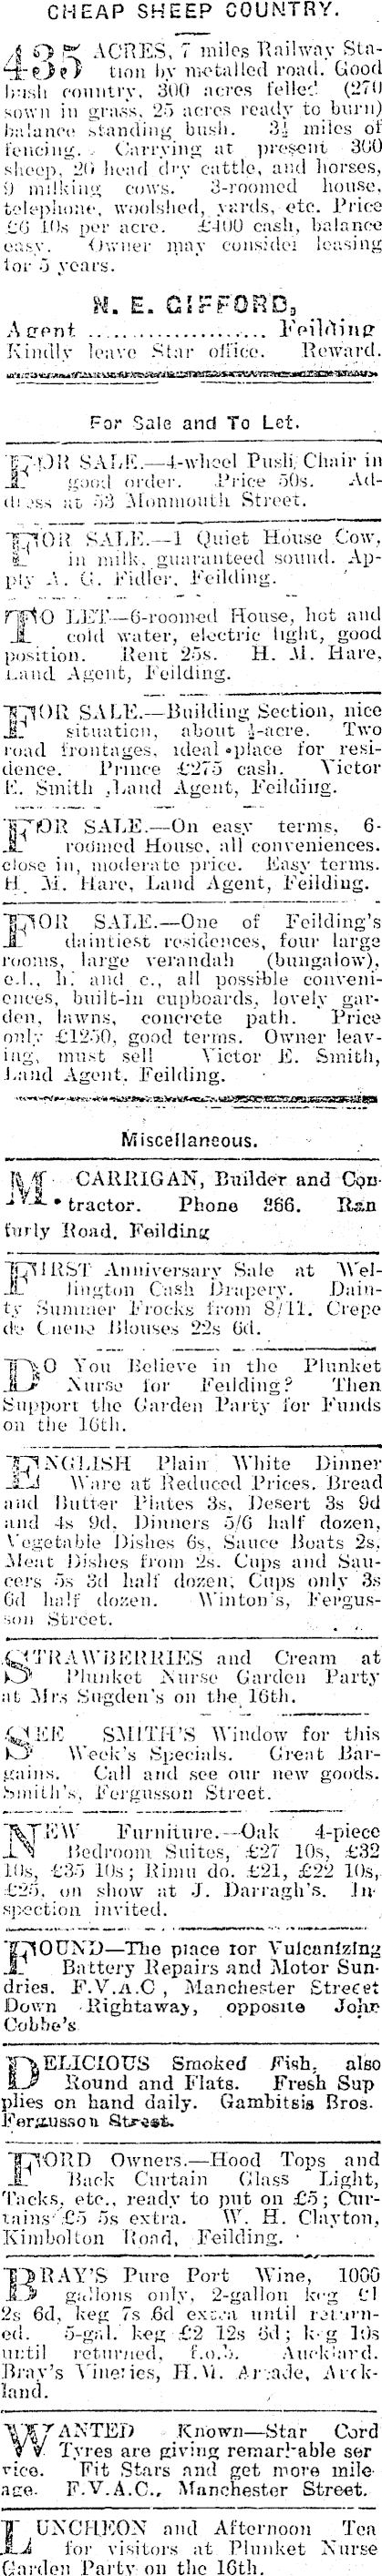 Papers Past Newspapers Feilding Star 9 November 1923 Page 1 Advertisements Column 6